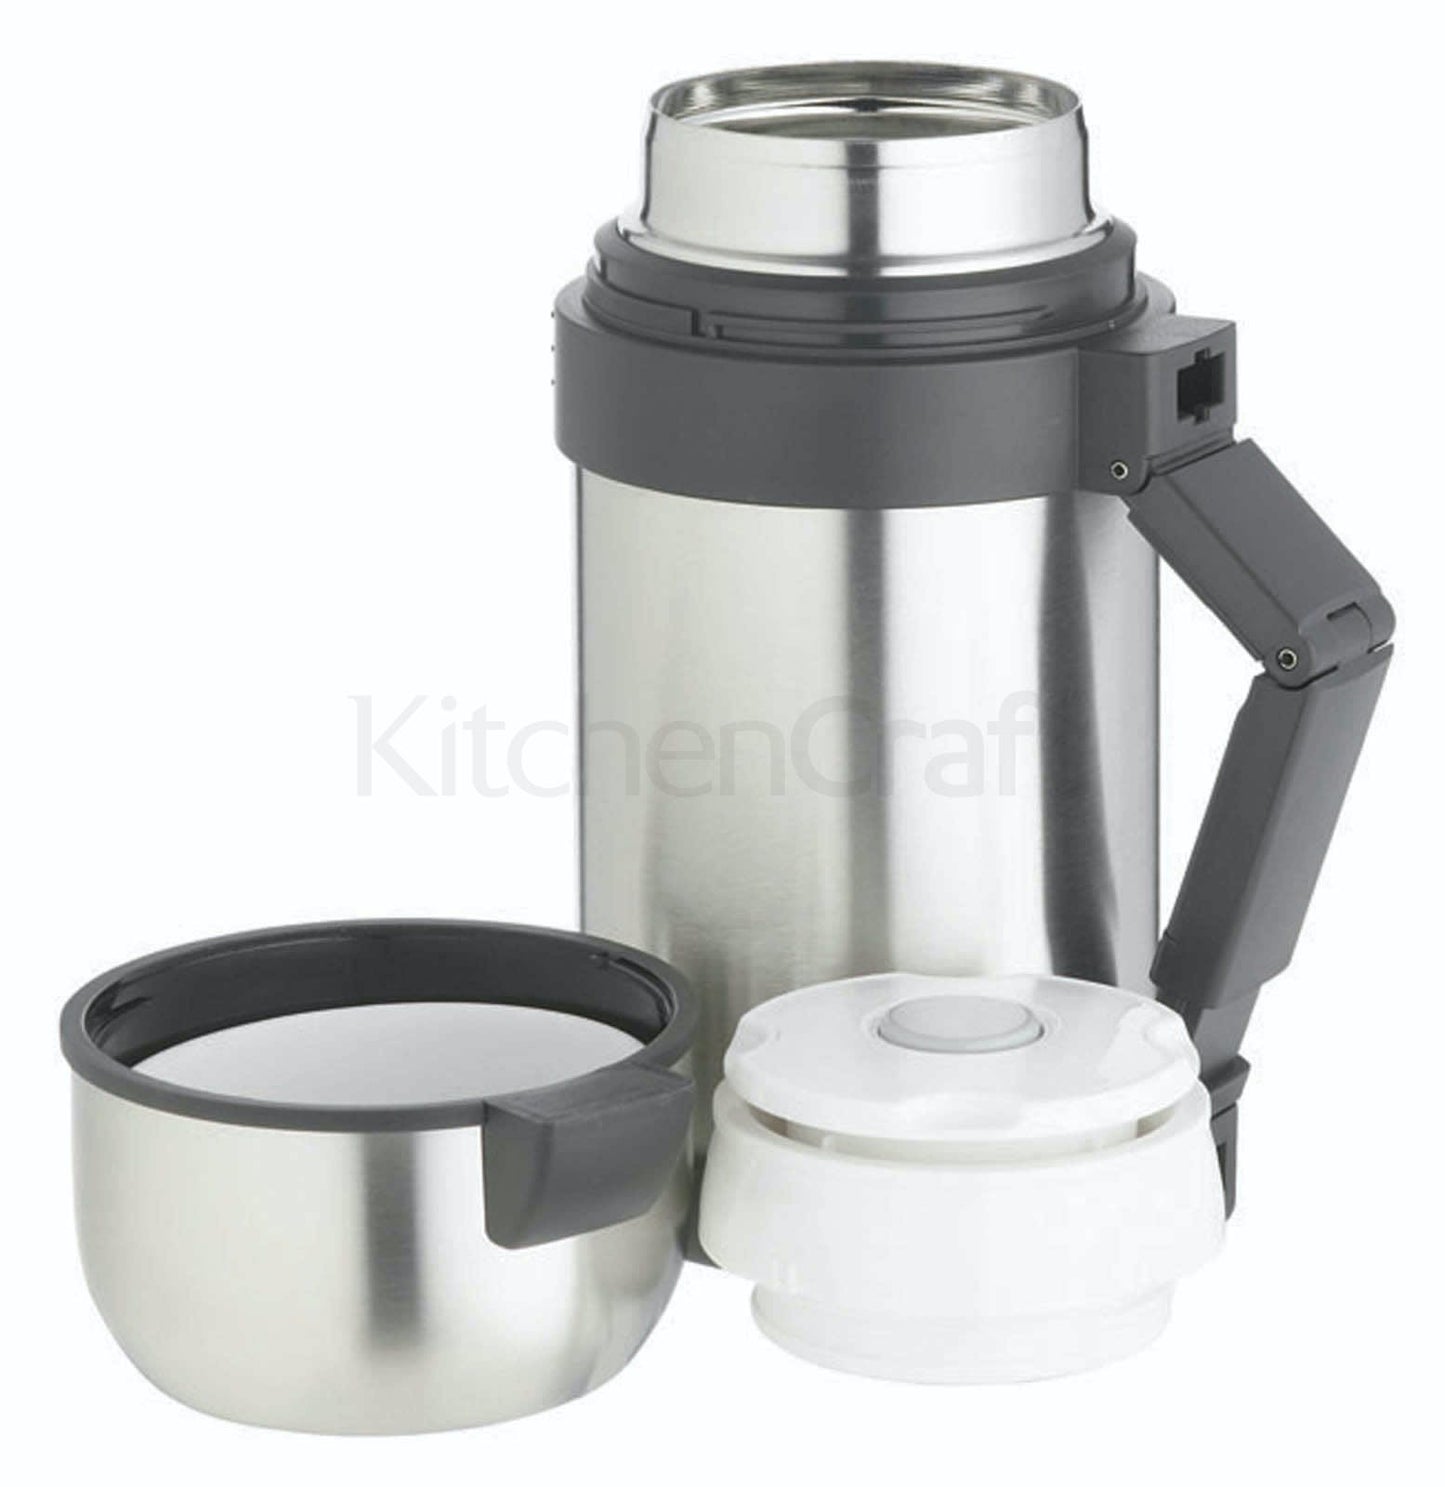 KitchenCraft MasterClass Stainless Steel 1 Litre Vacuum Soup / Food Flask KCMCFOODSS